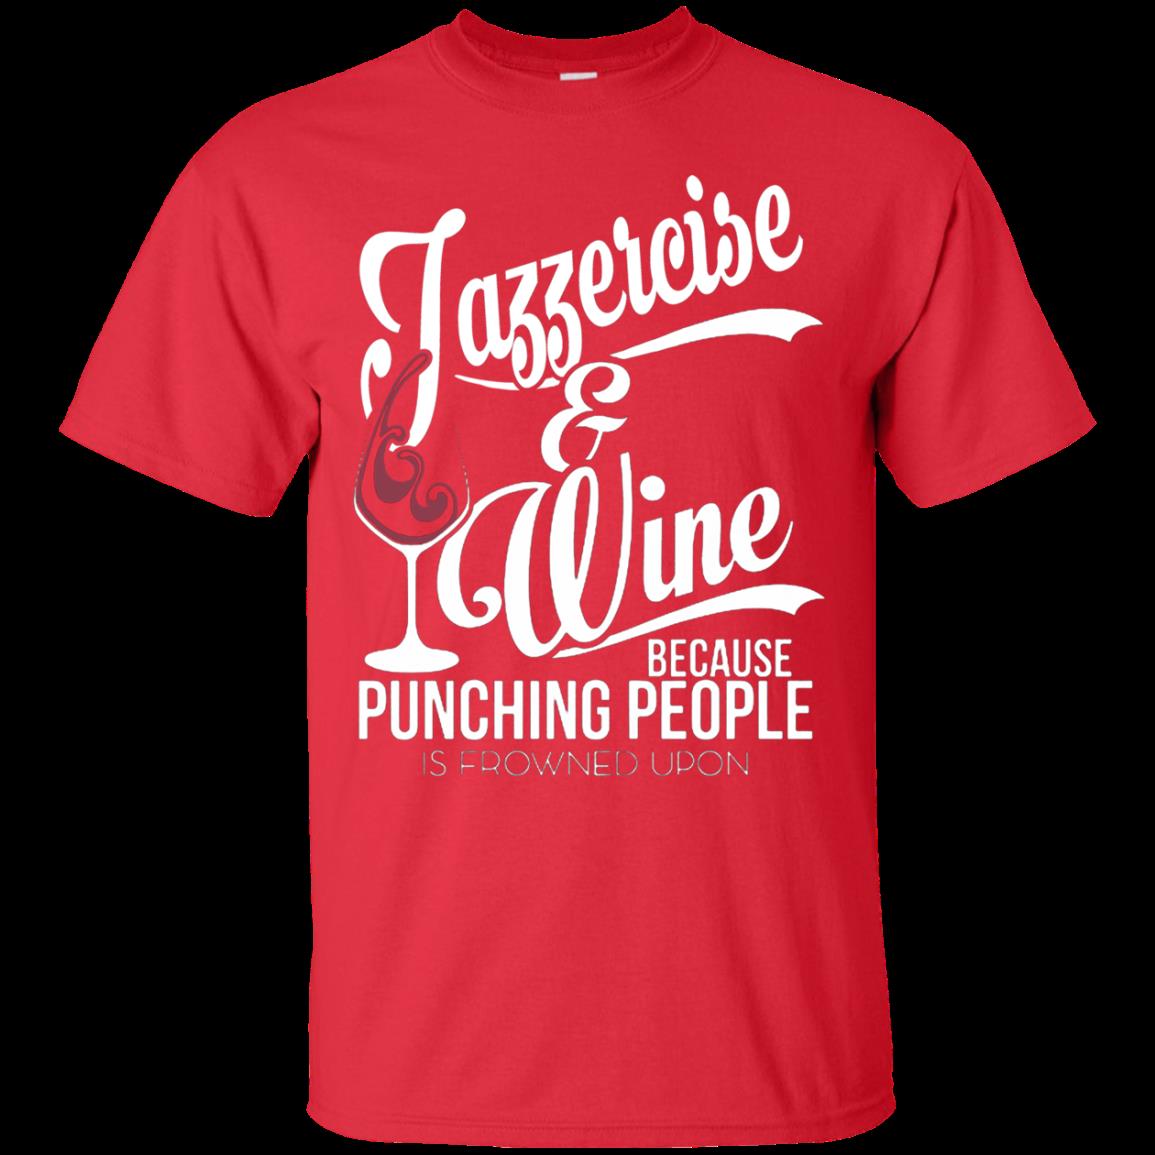 Jazzercise Wine Shirts Because Punching People Is Frowned Upon funny shirts,  gift shirts, Tshirt, Hoodie, Sweatshirt , Long Sleeve, Youth, Graphic Tee »  Cool Gifts for You - Mfamilygift